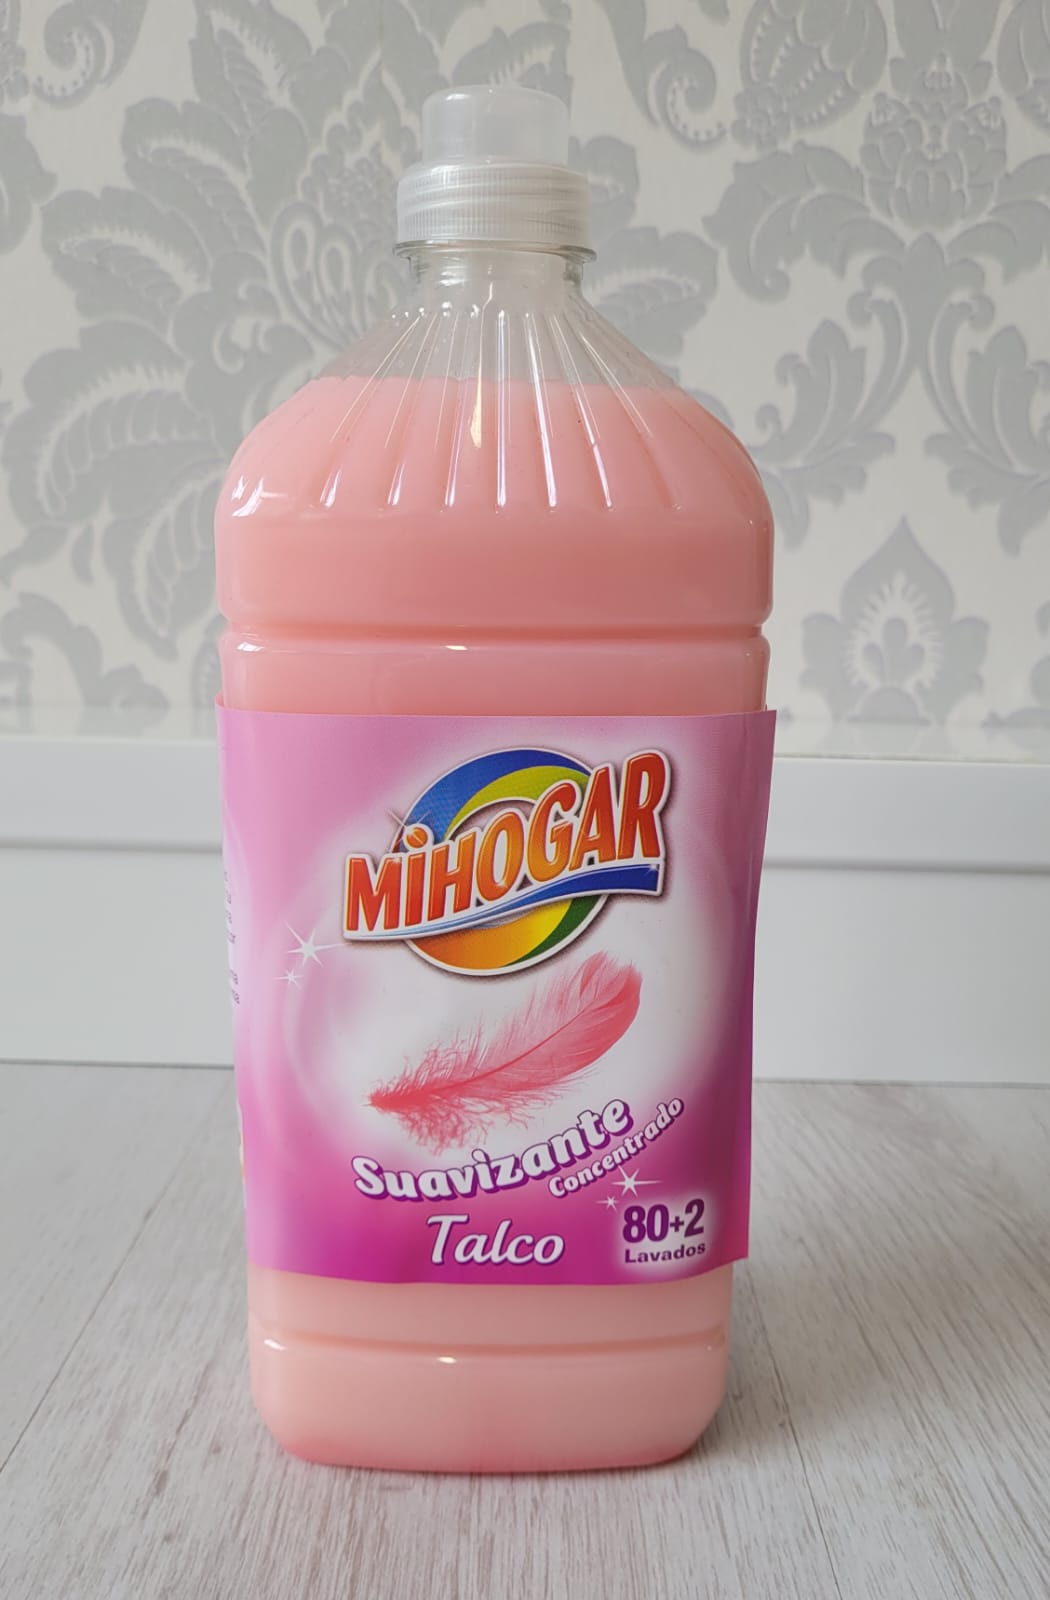 Mihogar Concentrated Fabric Softener 80 Wash 2 Litre - Talco🧸